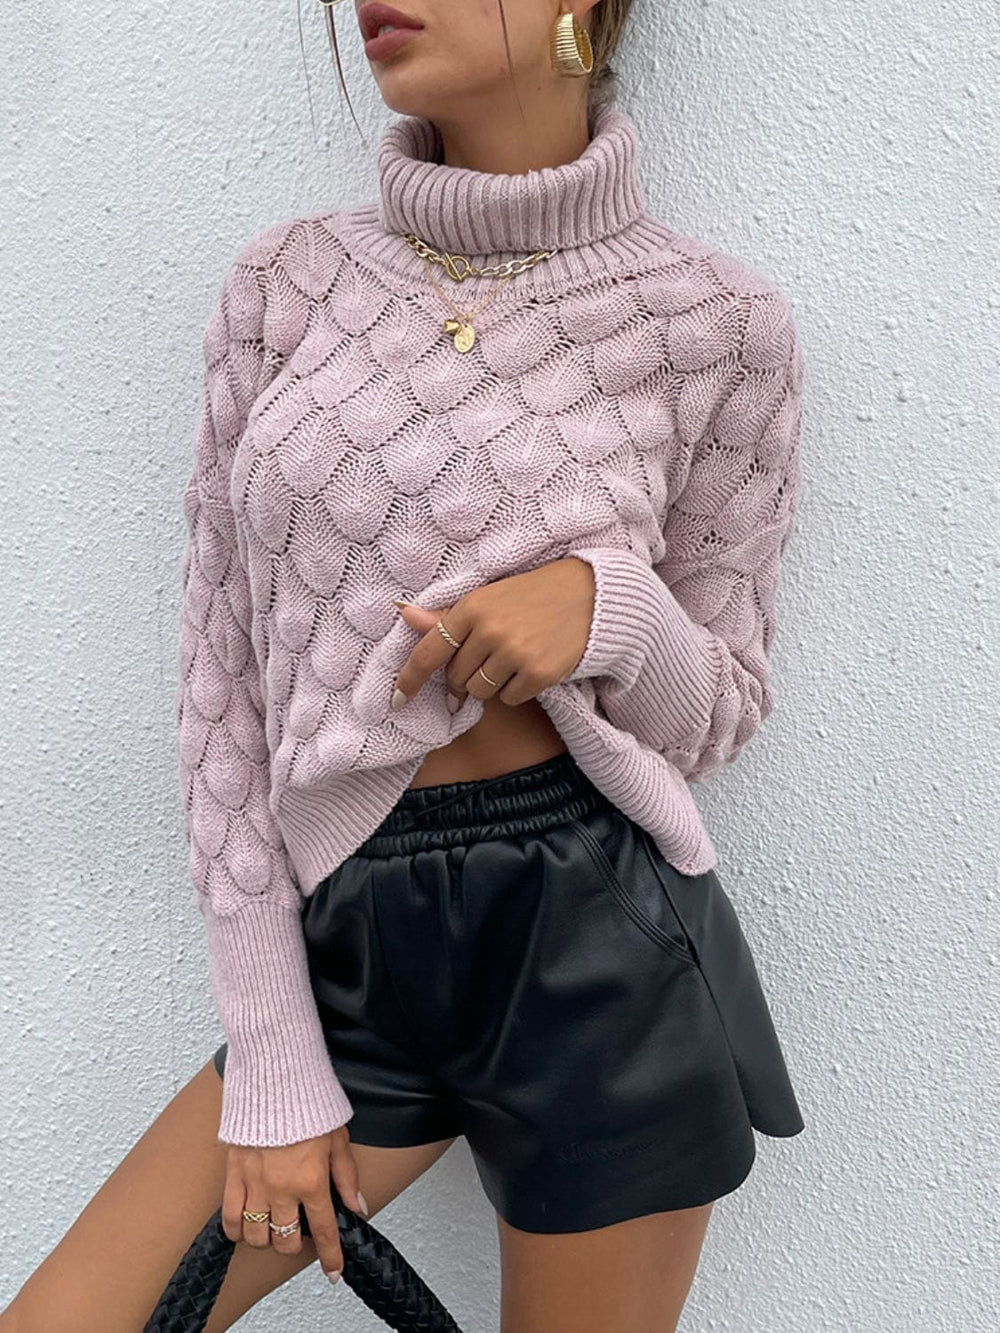 Trendsi sweater Dusty Pink / S Gypsy Lion Turtle Neck Ribbed Sweater